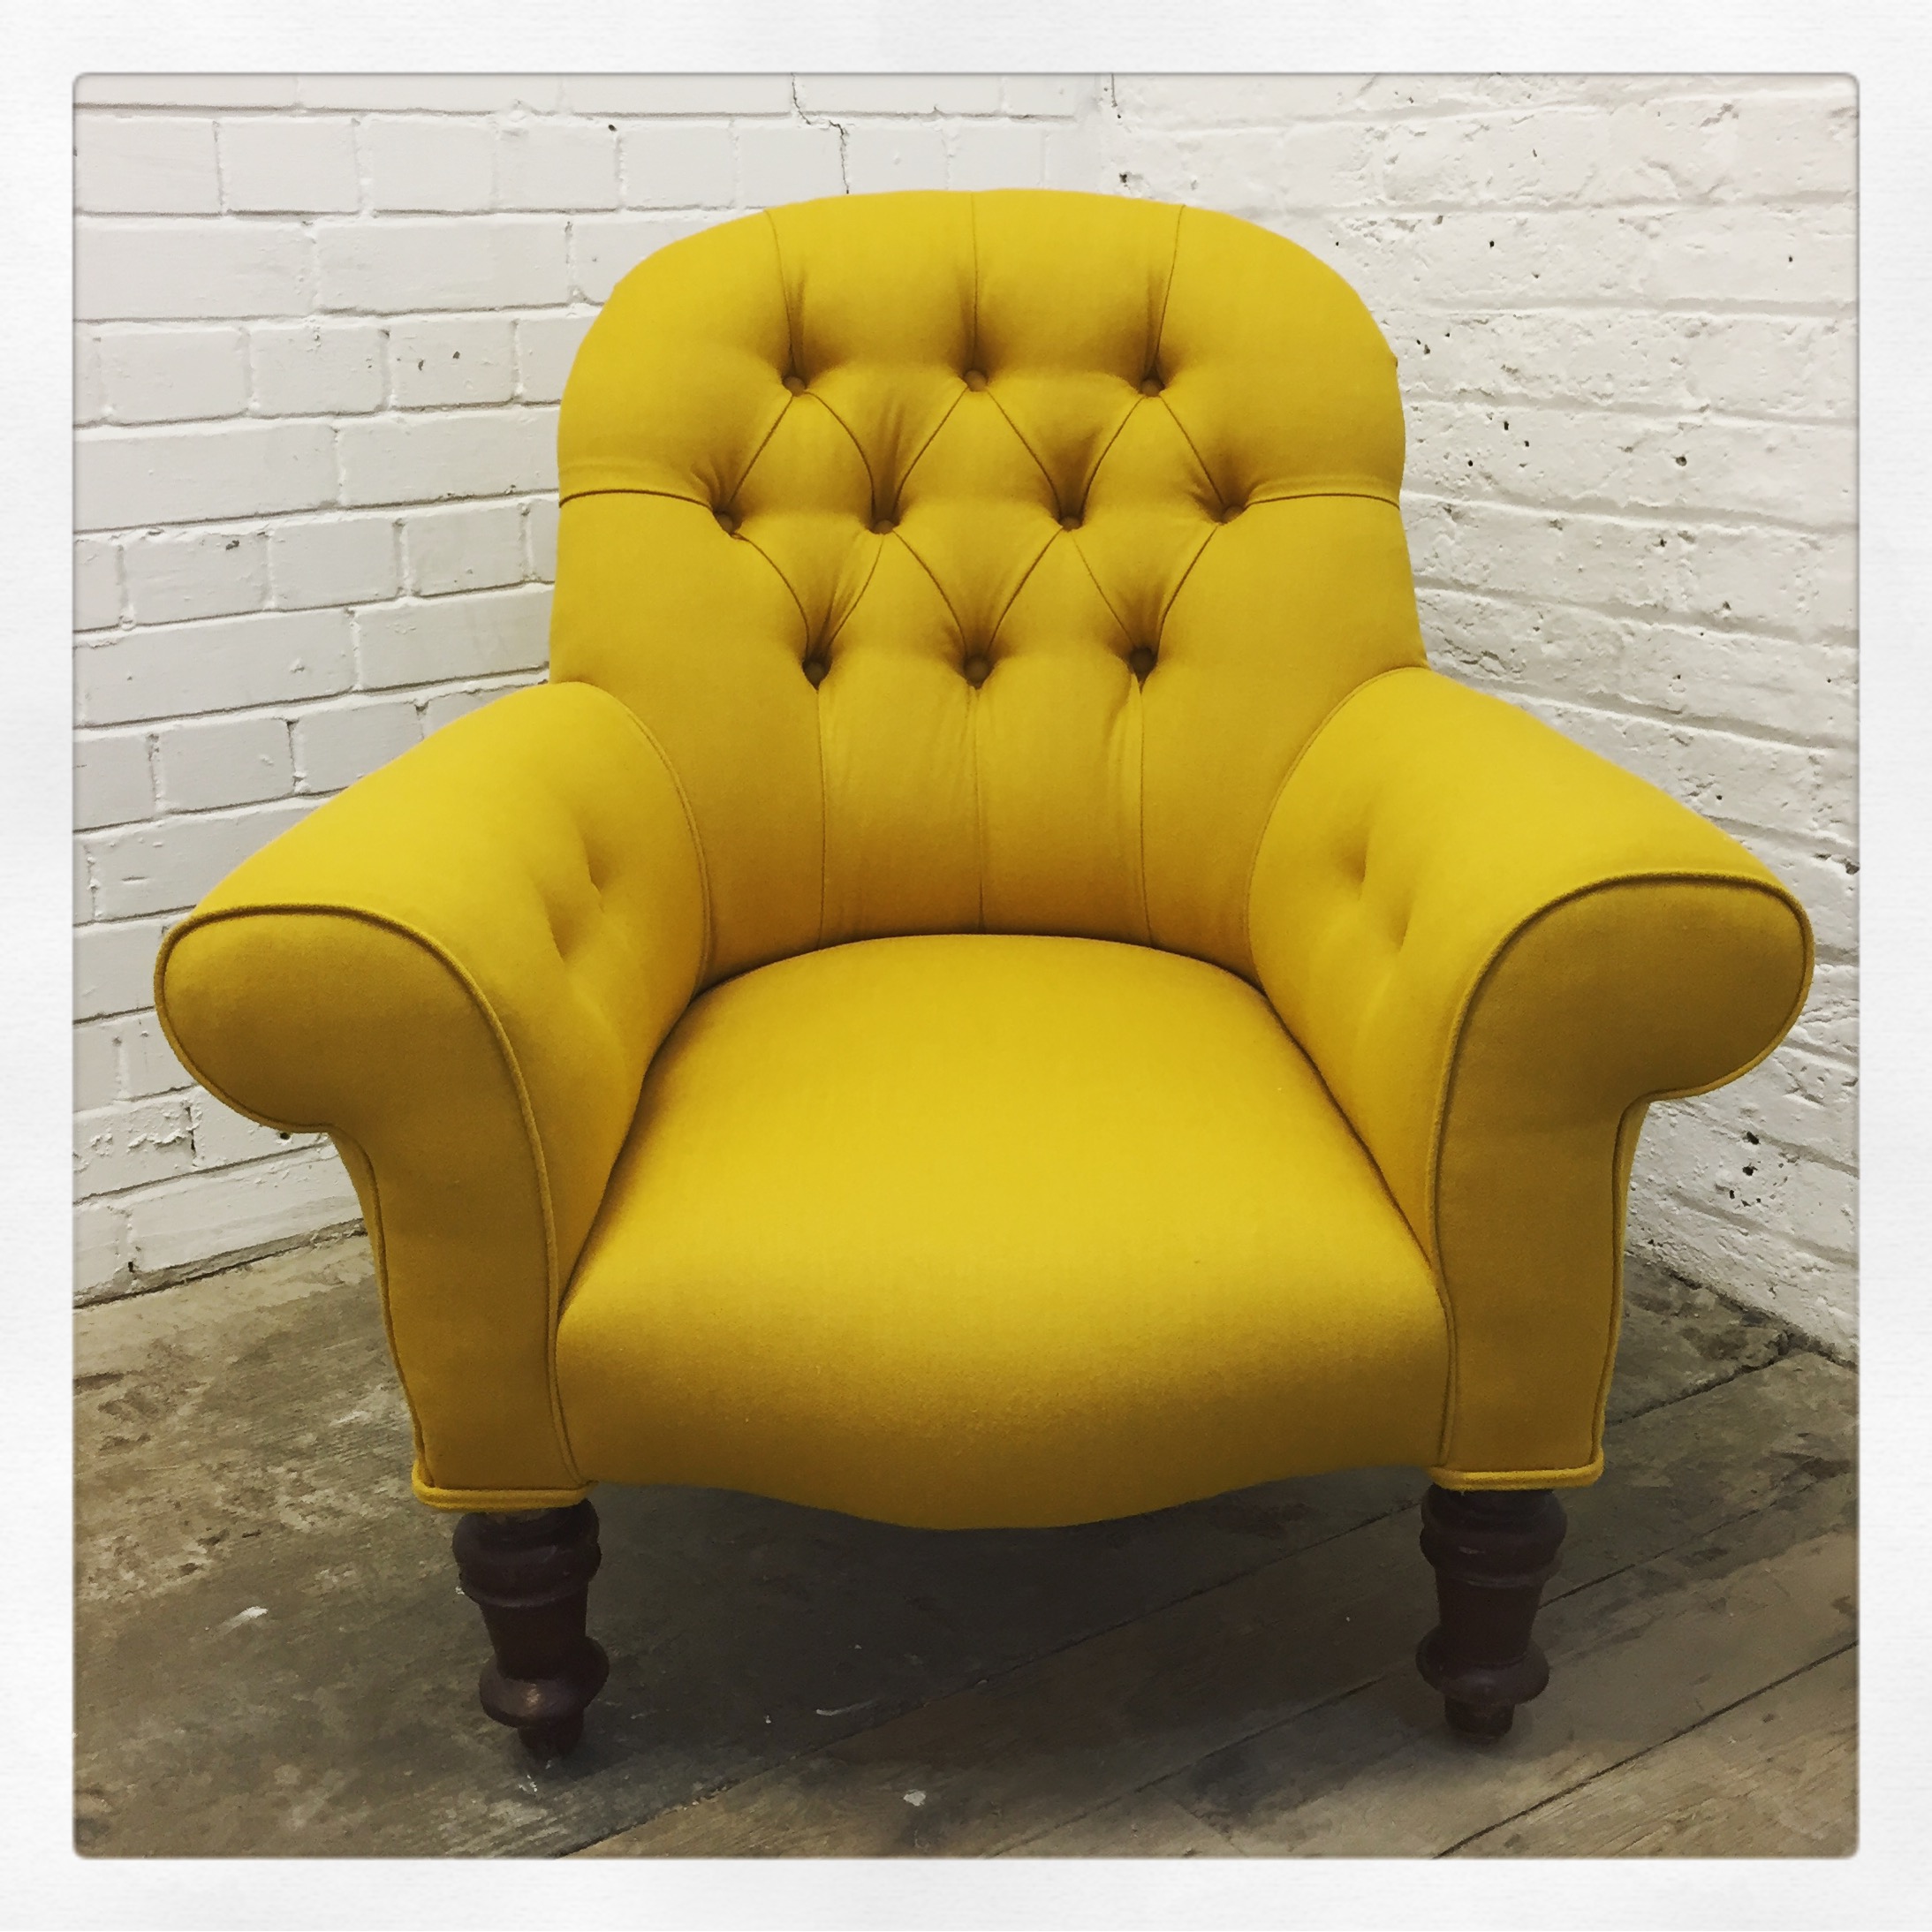 Armchair Upholstery Service with Yellow Fabric